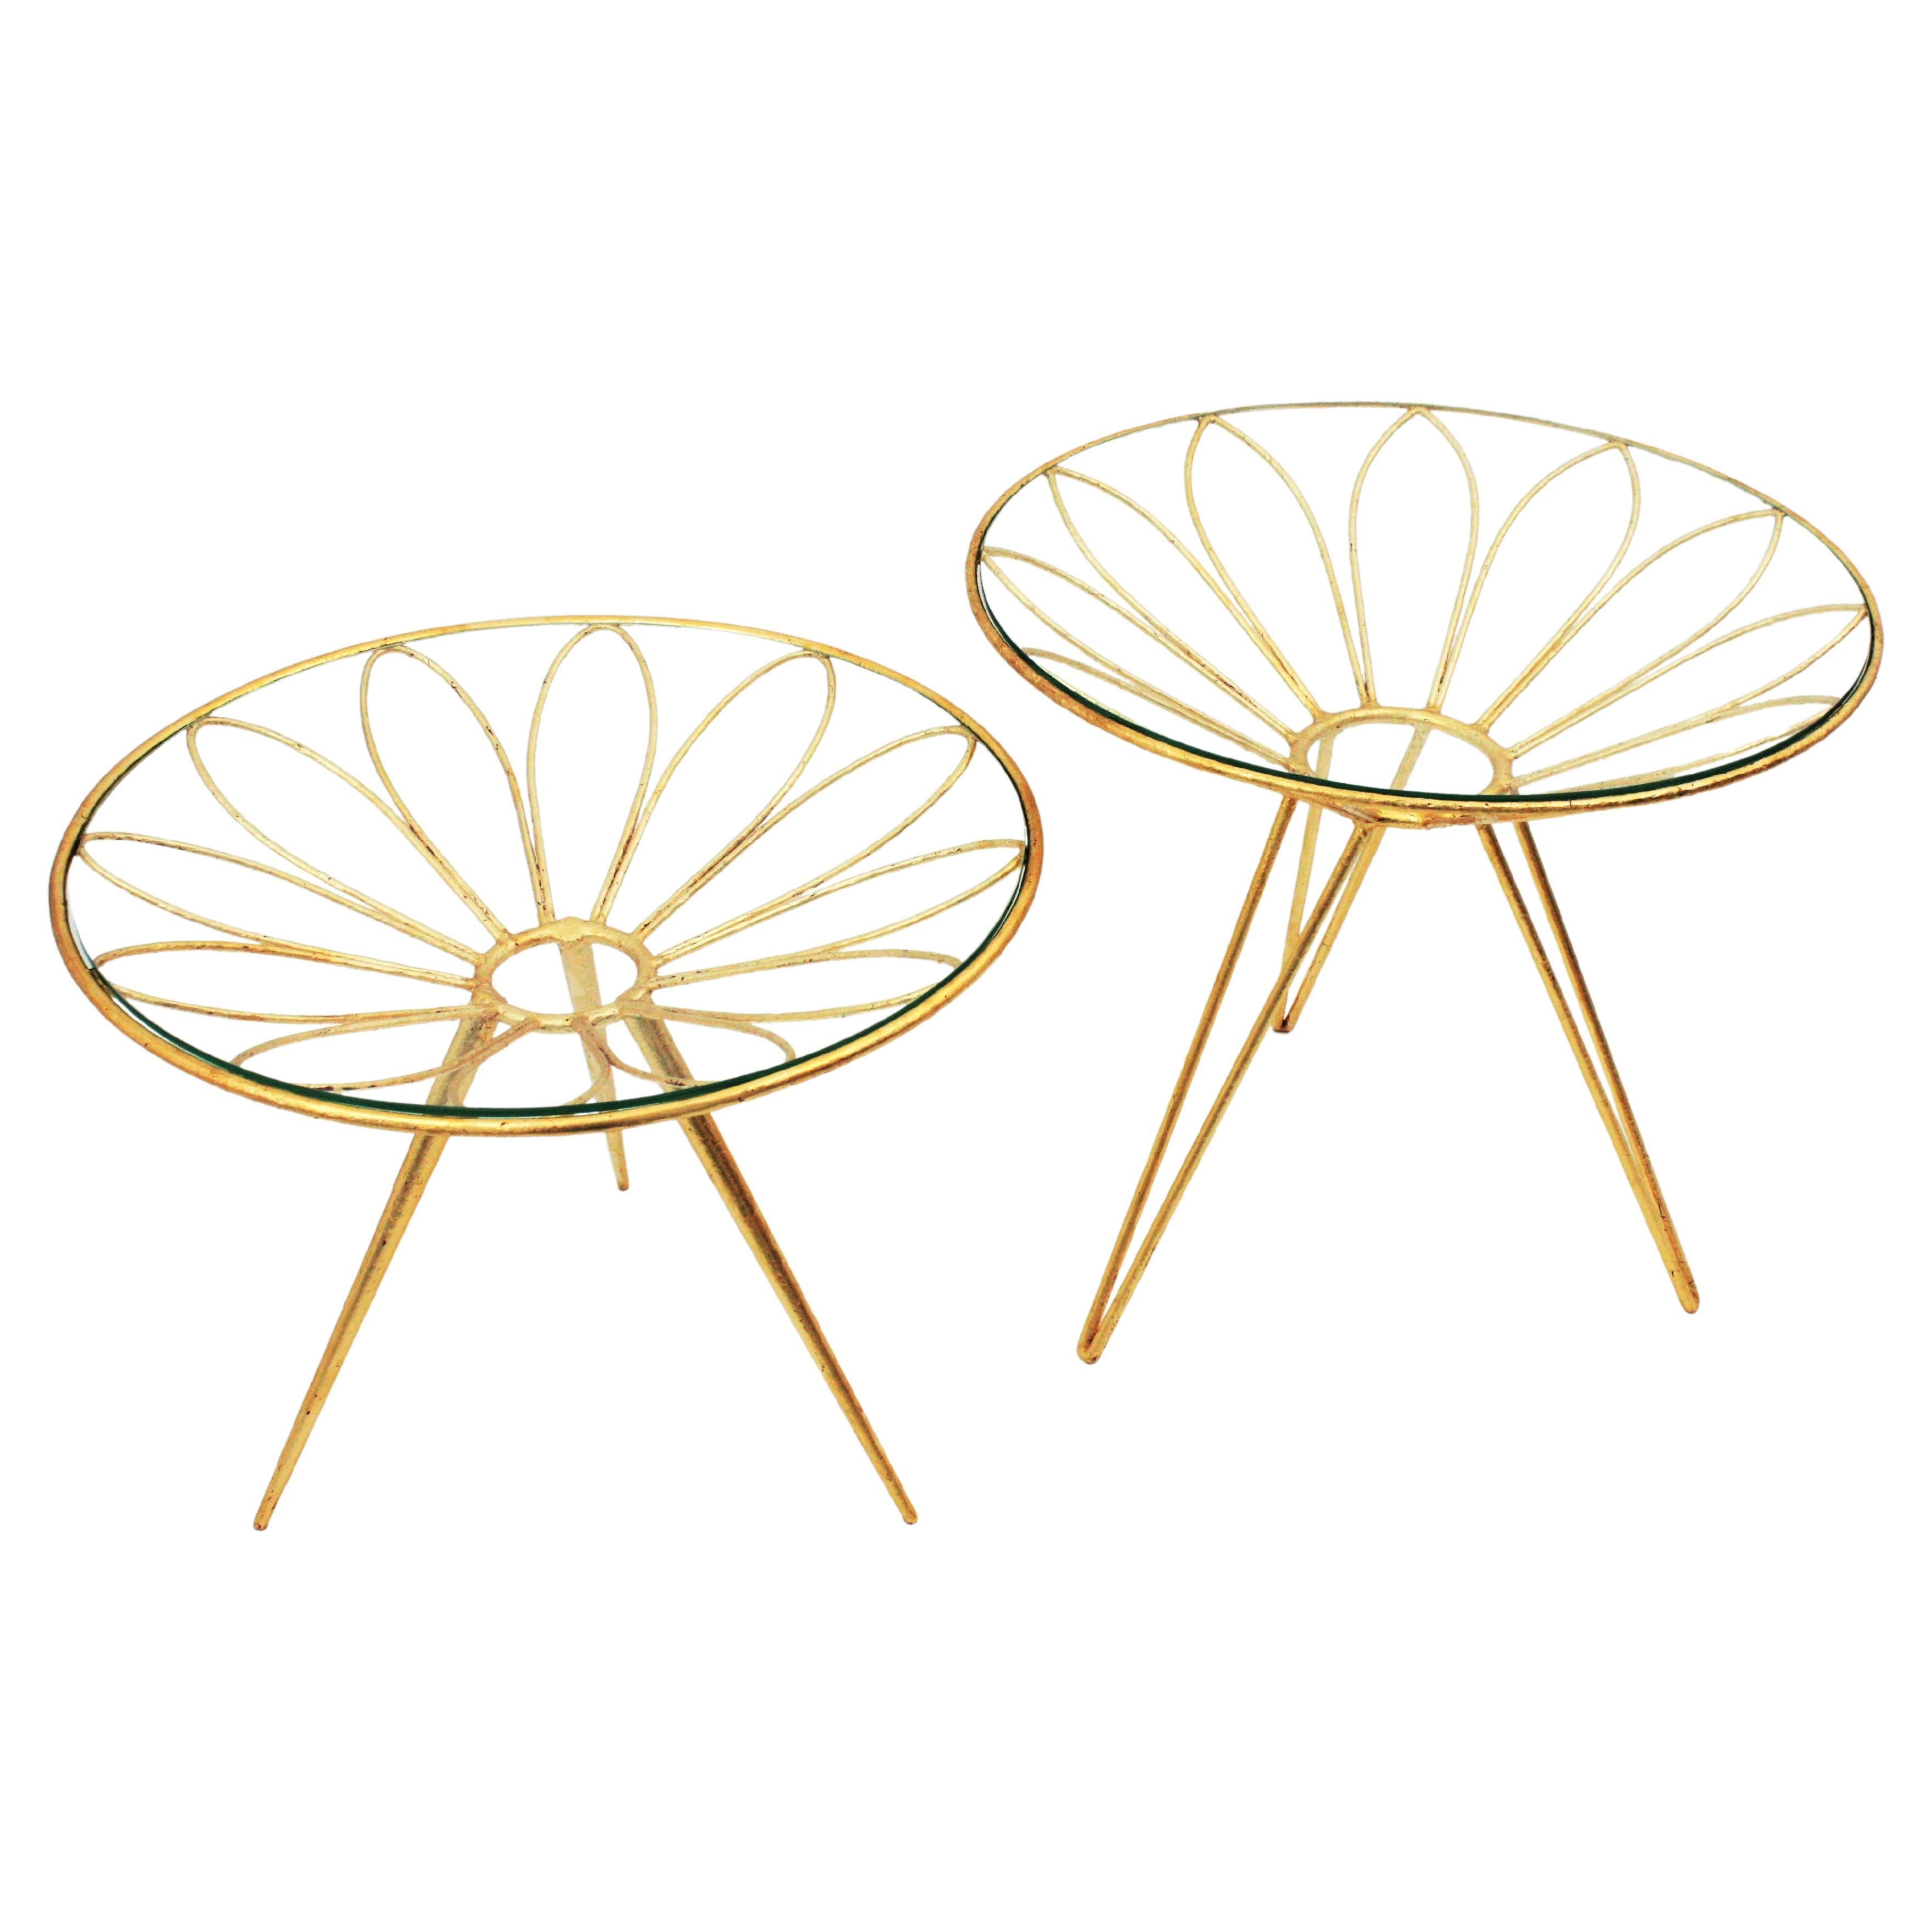 Round Side Tables in Gilt Iron with Daisy Flower Design, 1950s